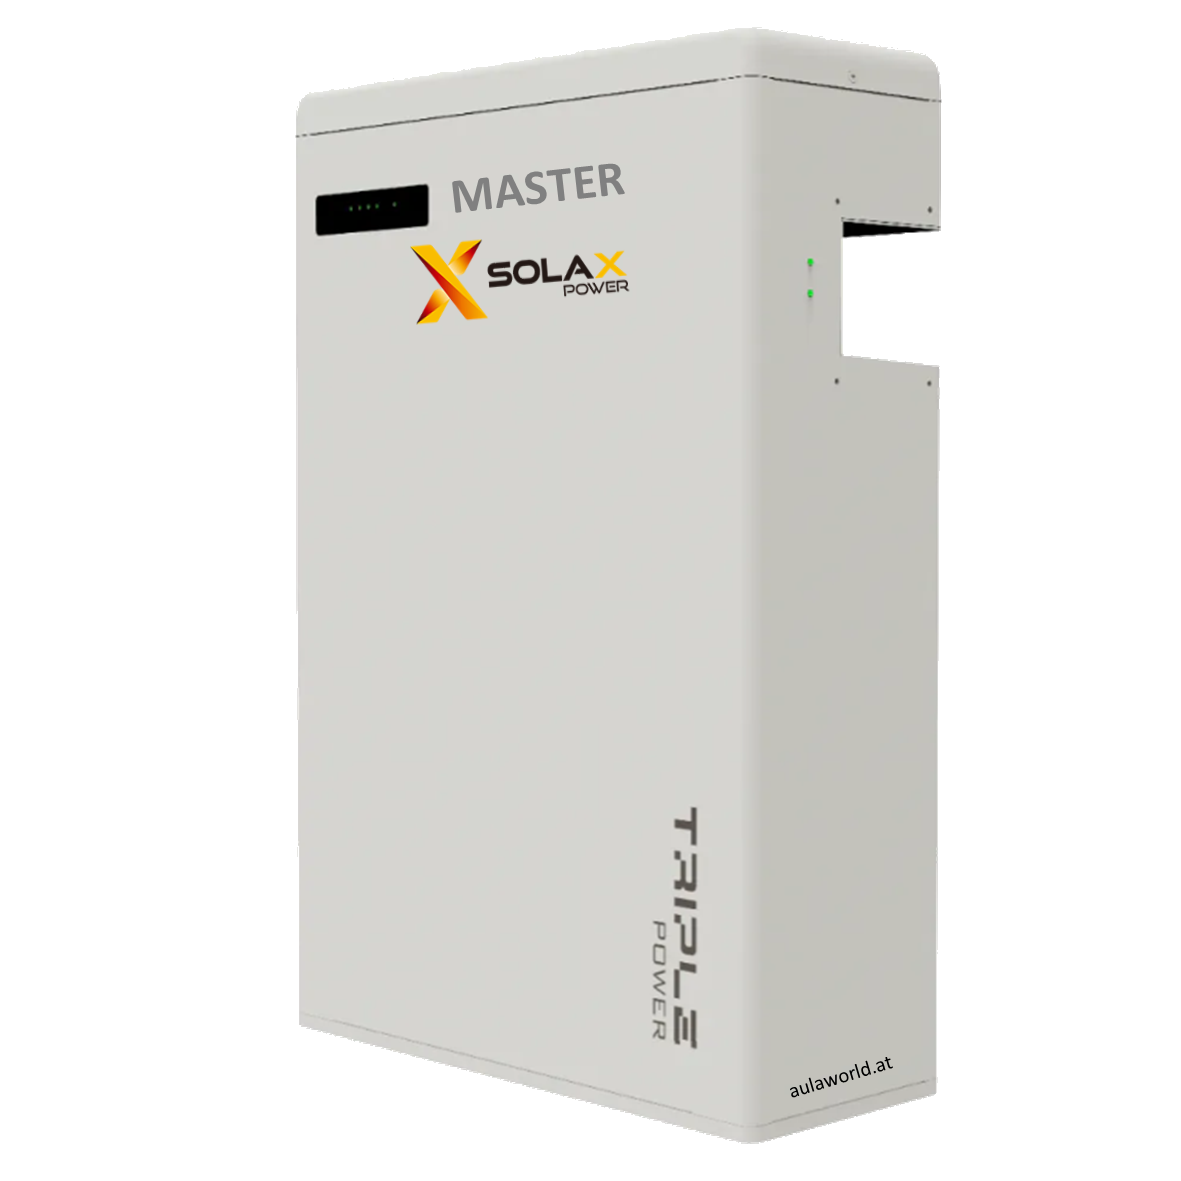 SOLAX - 5,8 kWh T5.8 Triple Power - MASTER  | Batterie Powerpack 